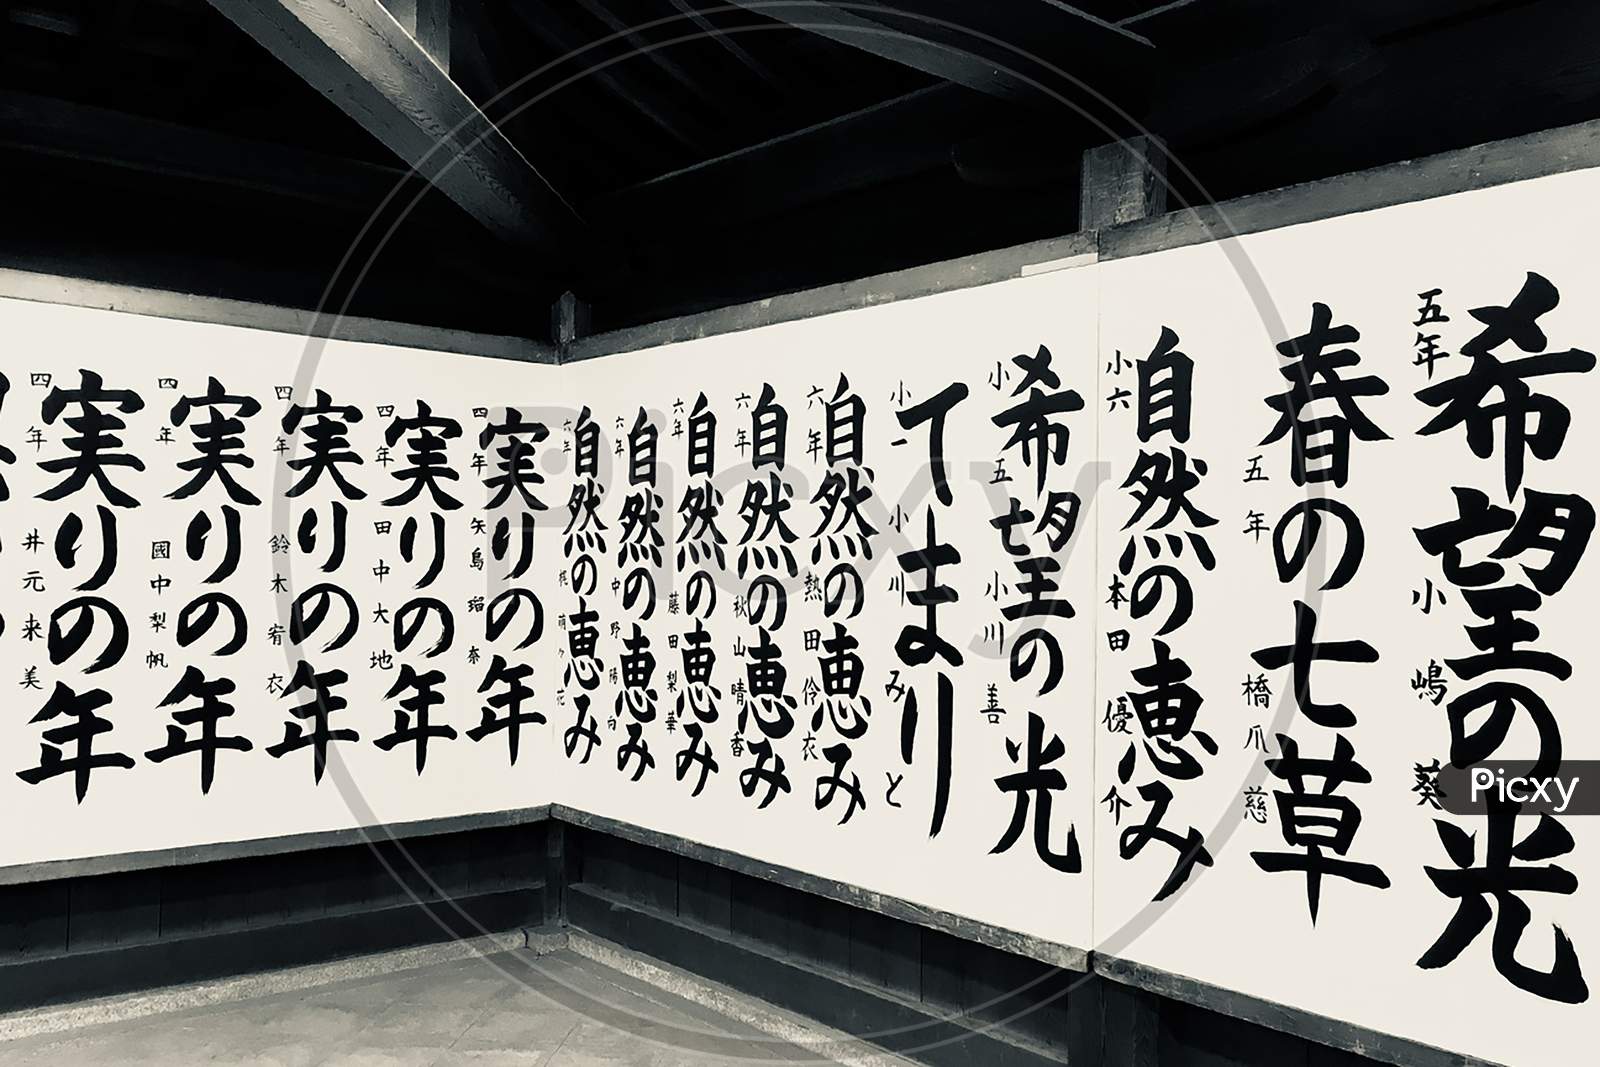 Art of calligraphy with Japanese characters on wall of temple in Japan